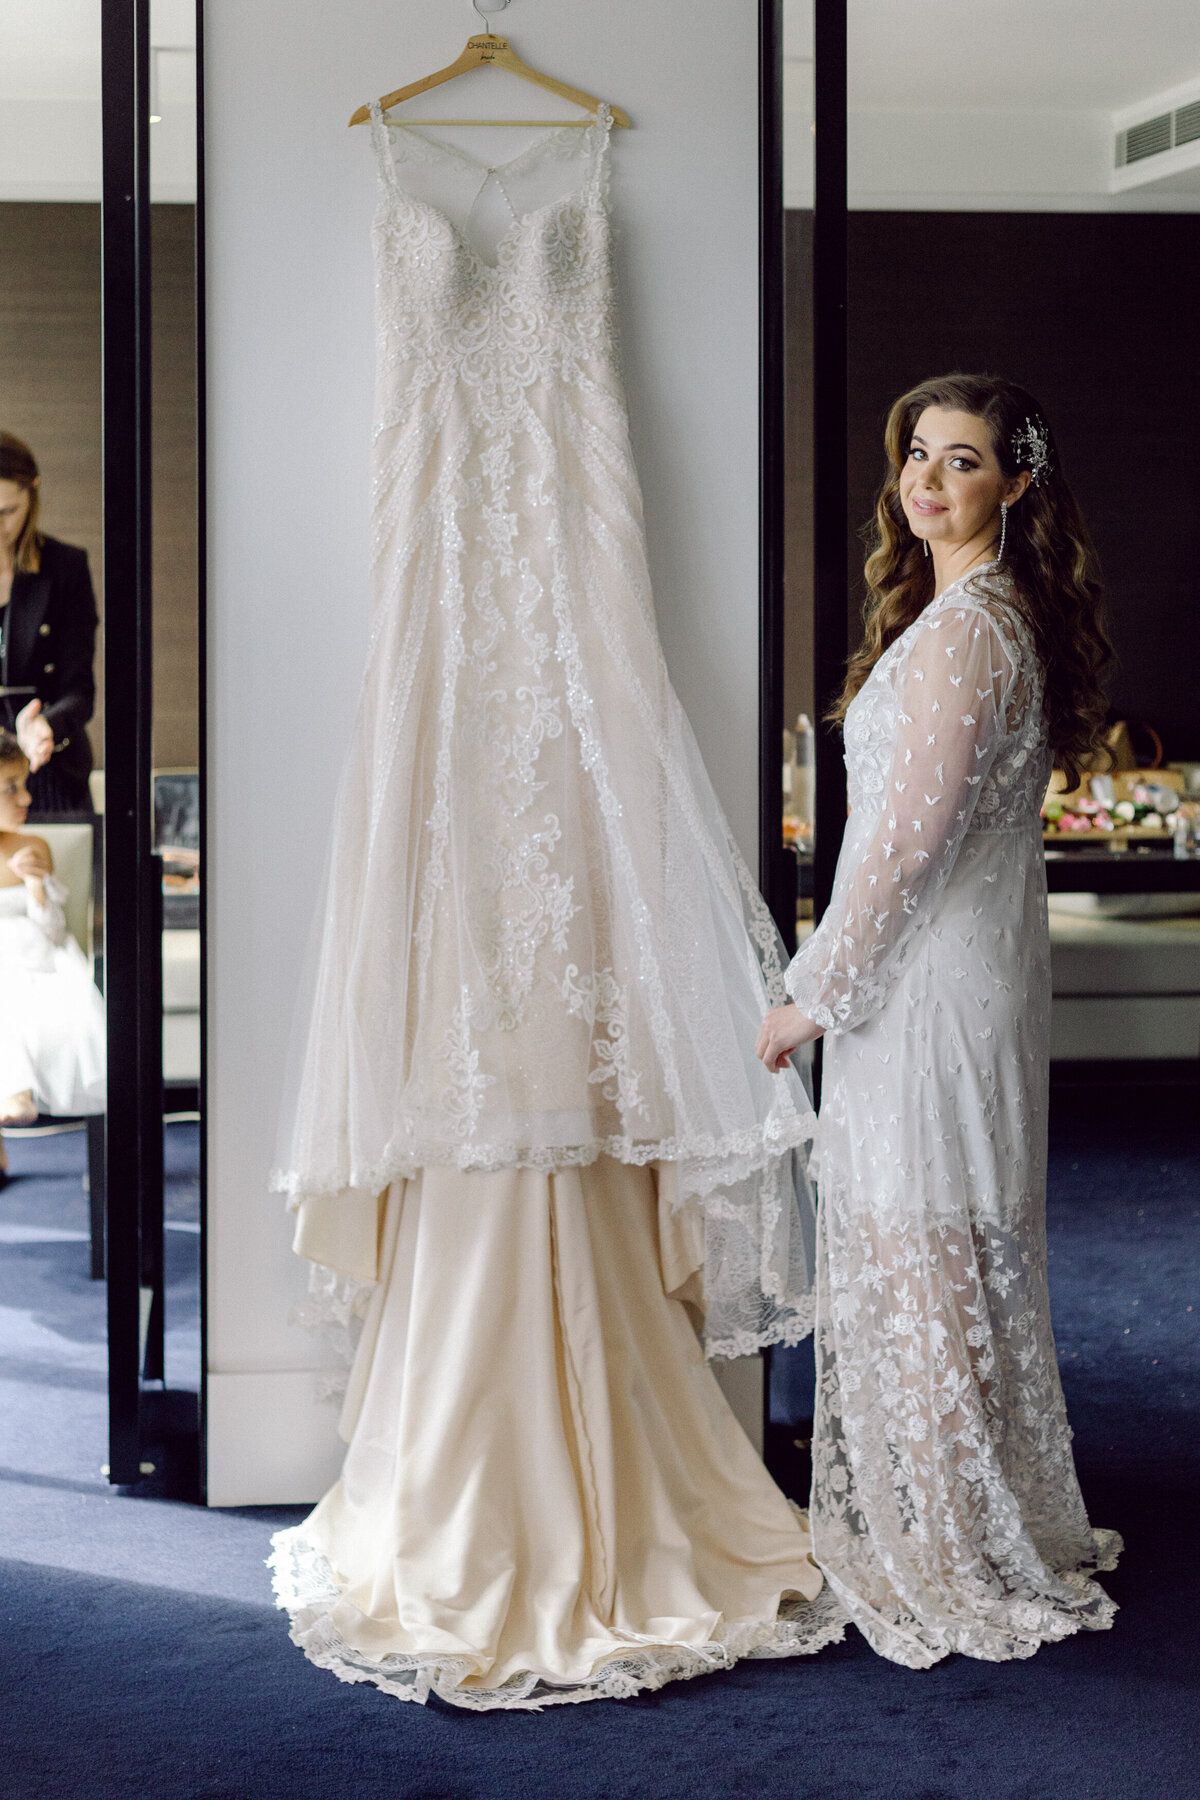 Wedding Gown and Bride in Lace Robe